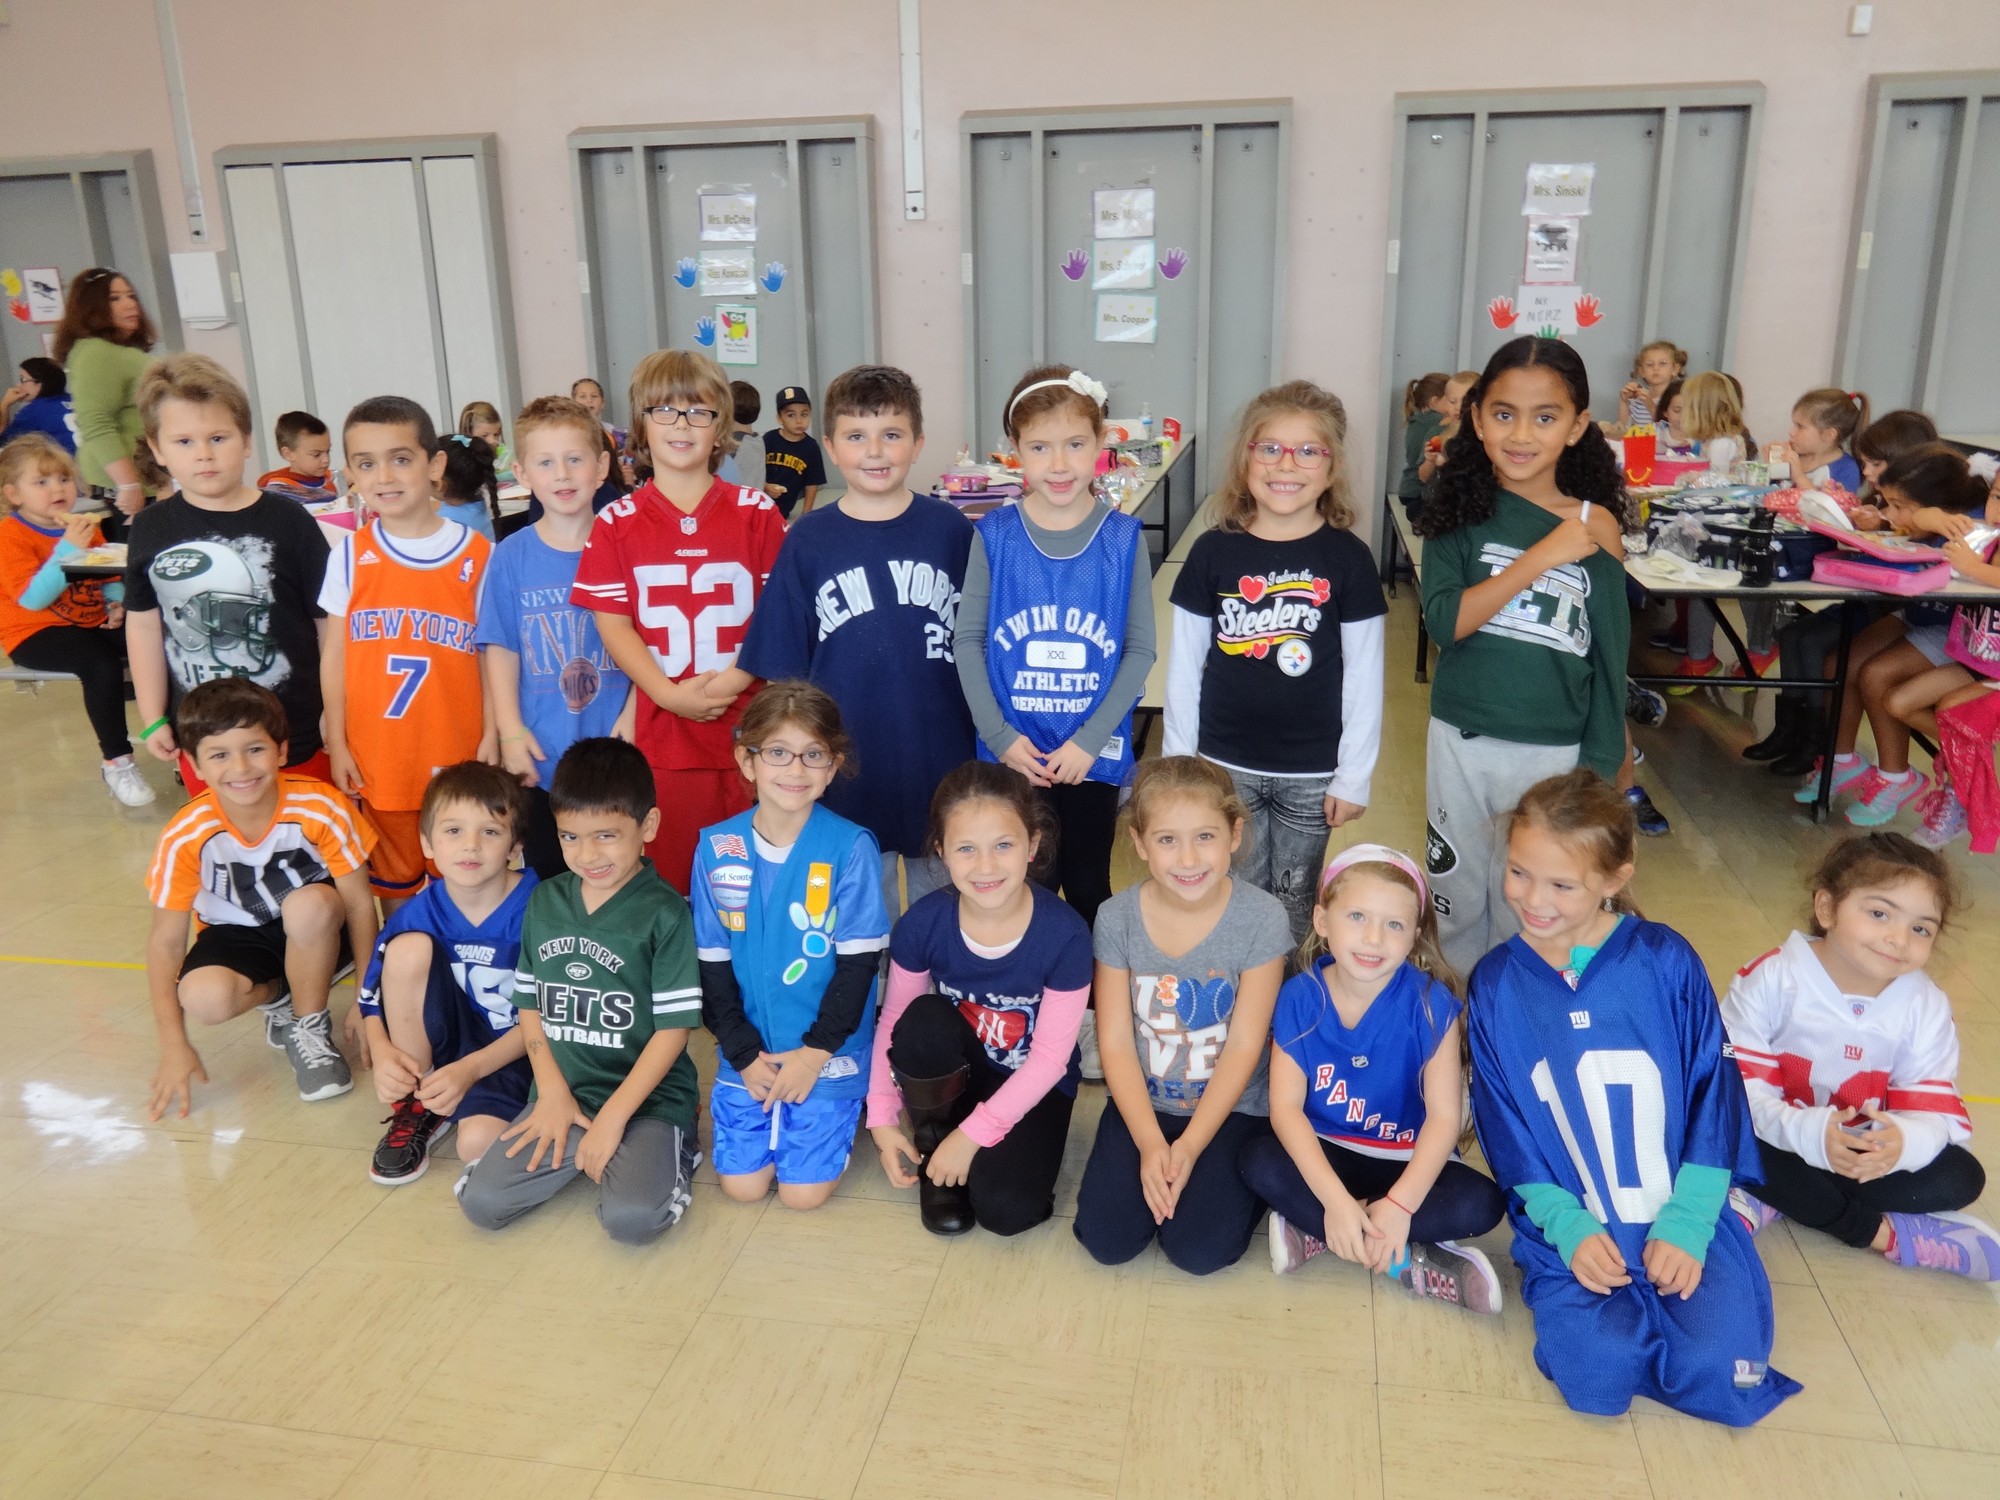 Students wore jerseys on Sports Day.